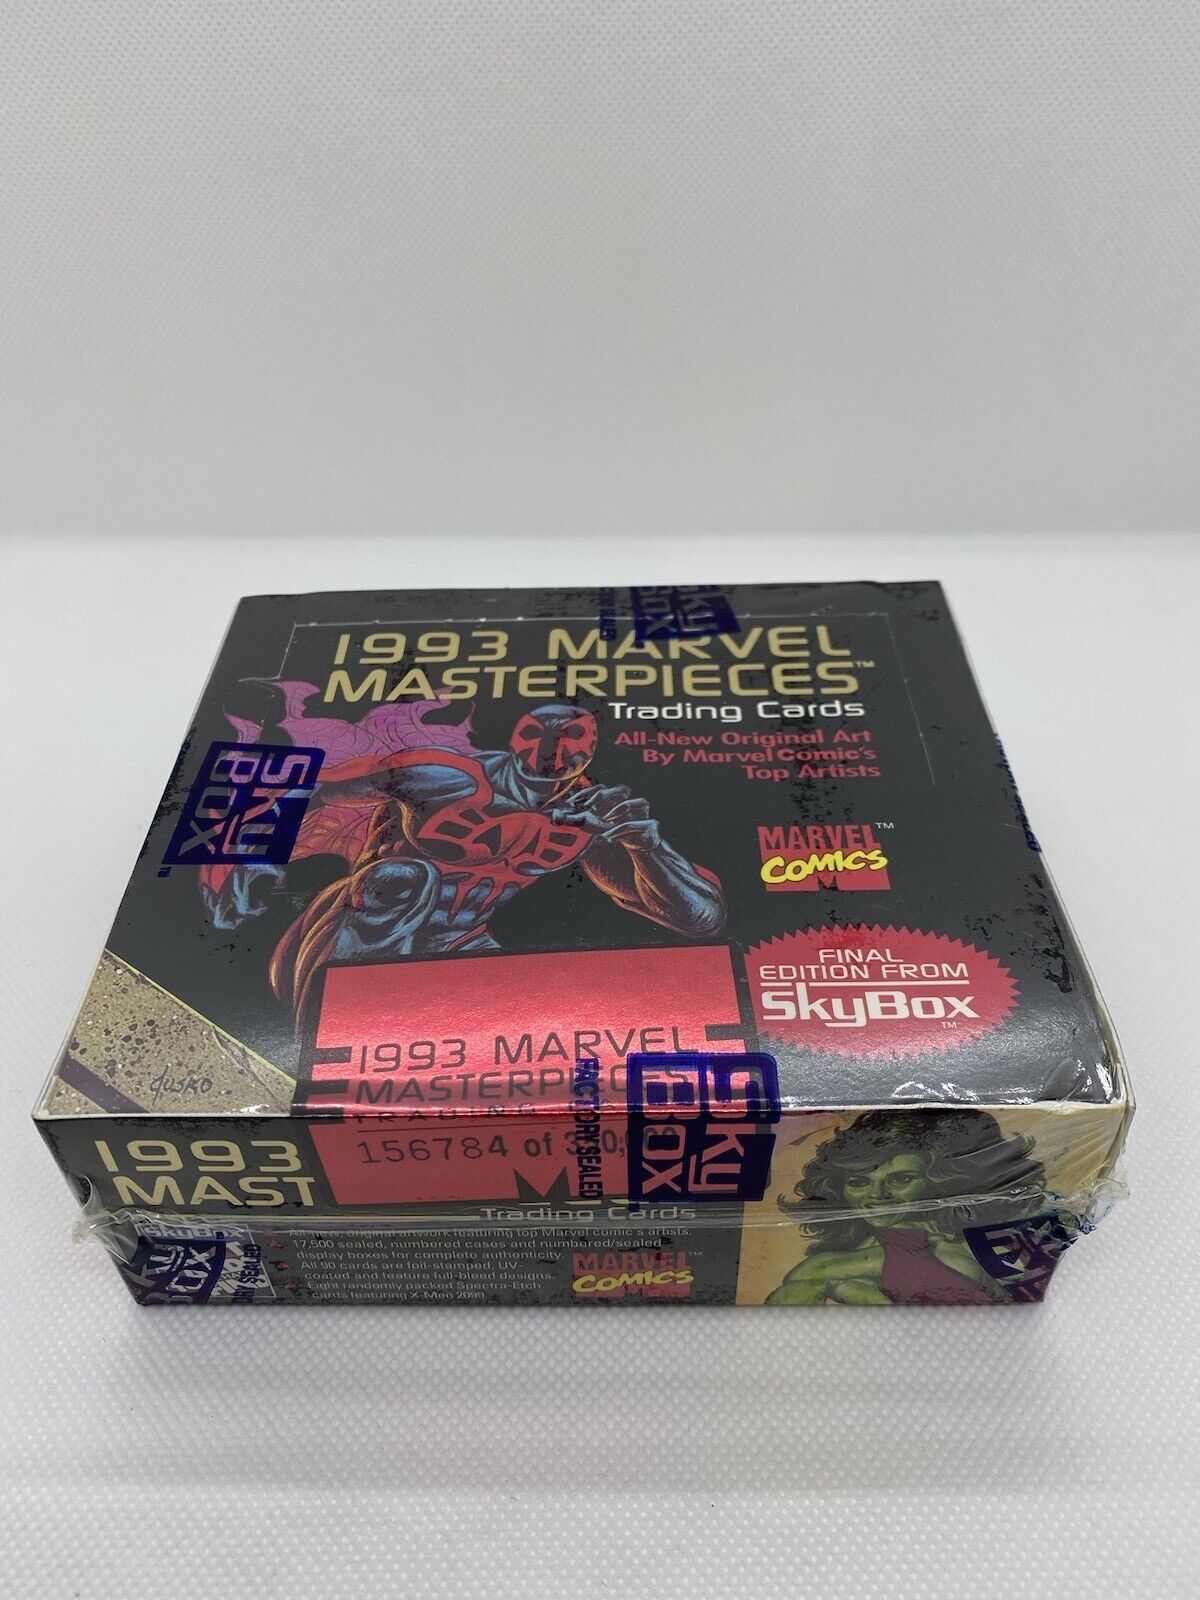 Unopened - Factory Sealed Skybox - (1993) Marvel Masterpieces Trading Cards